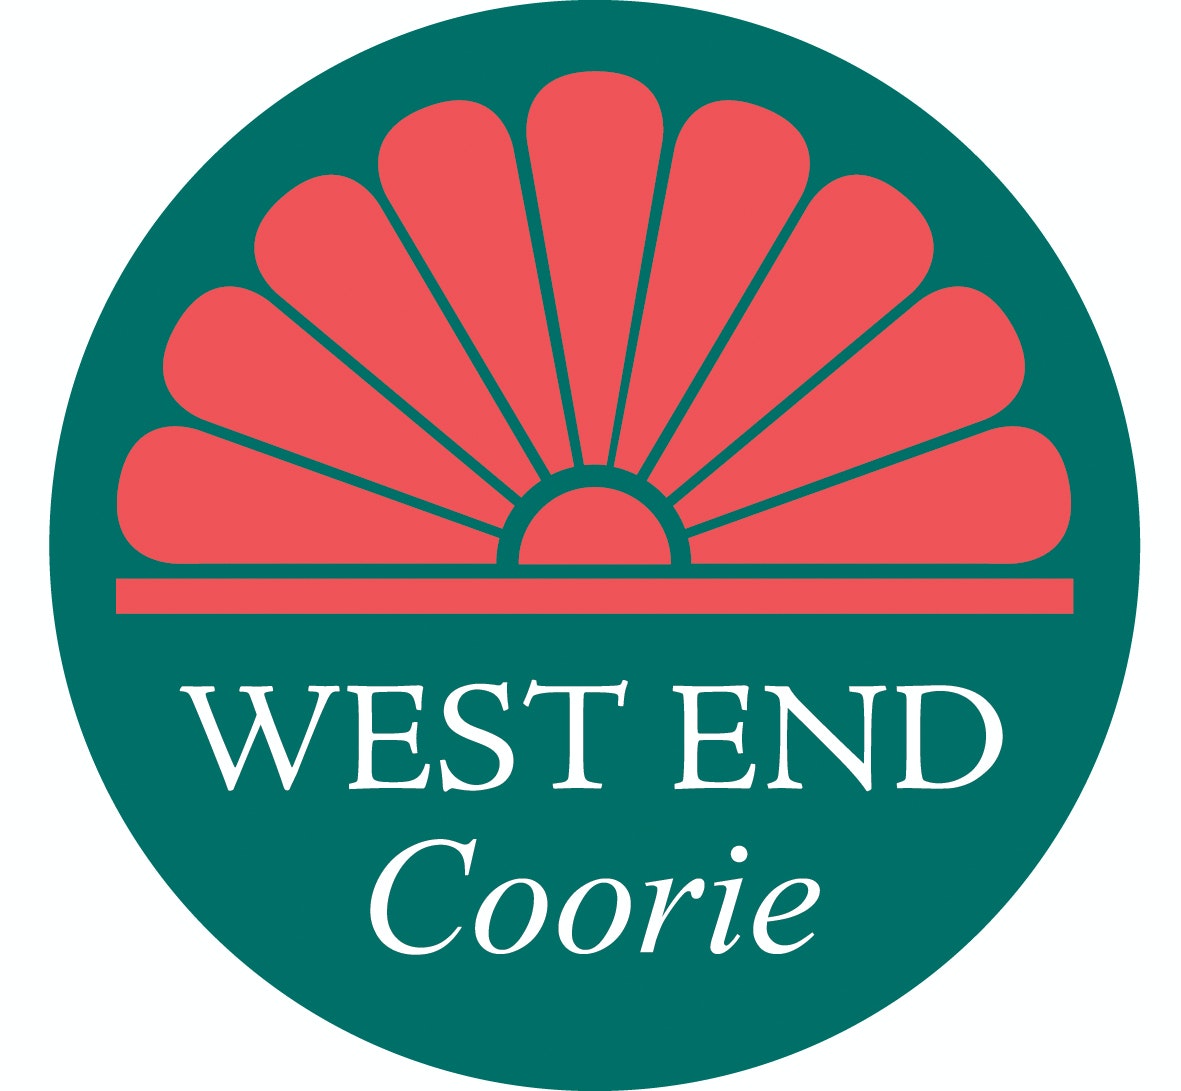 Creating a new inclusive event - the West End Coorie. NEW blog from @markmckergow about village-building in Edinburgh using #solutionfocus and #ACBD methods at Village in the City ecs.page.link/RbEoW